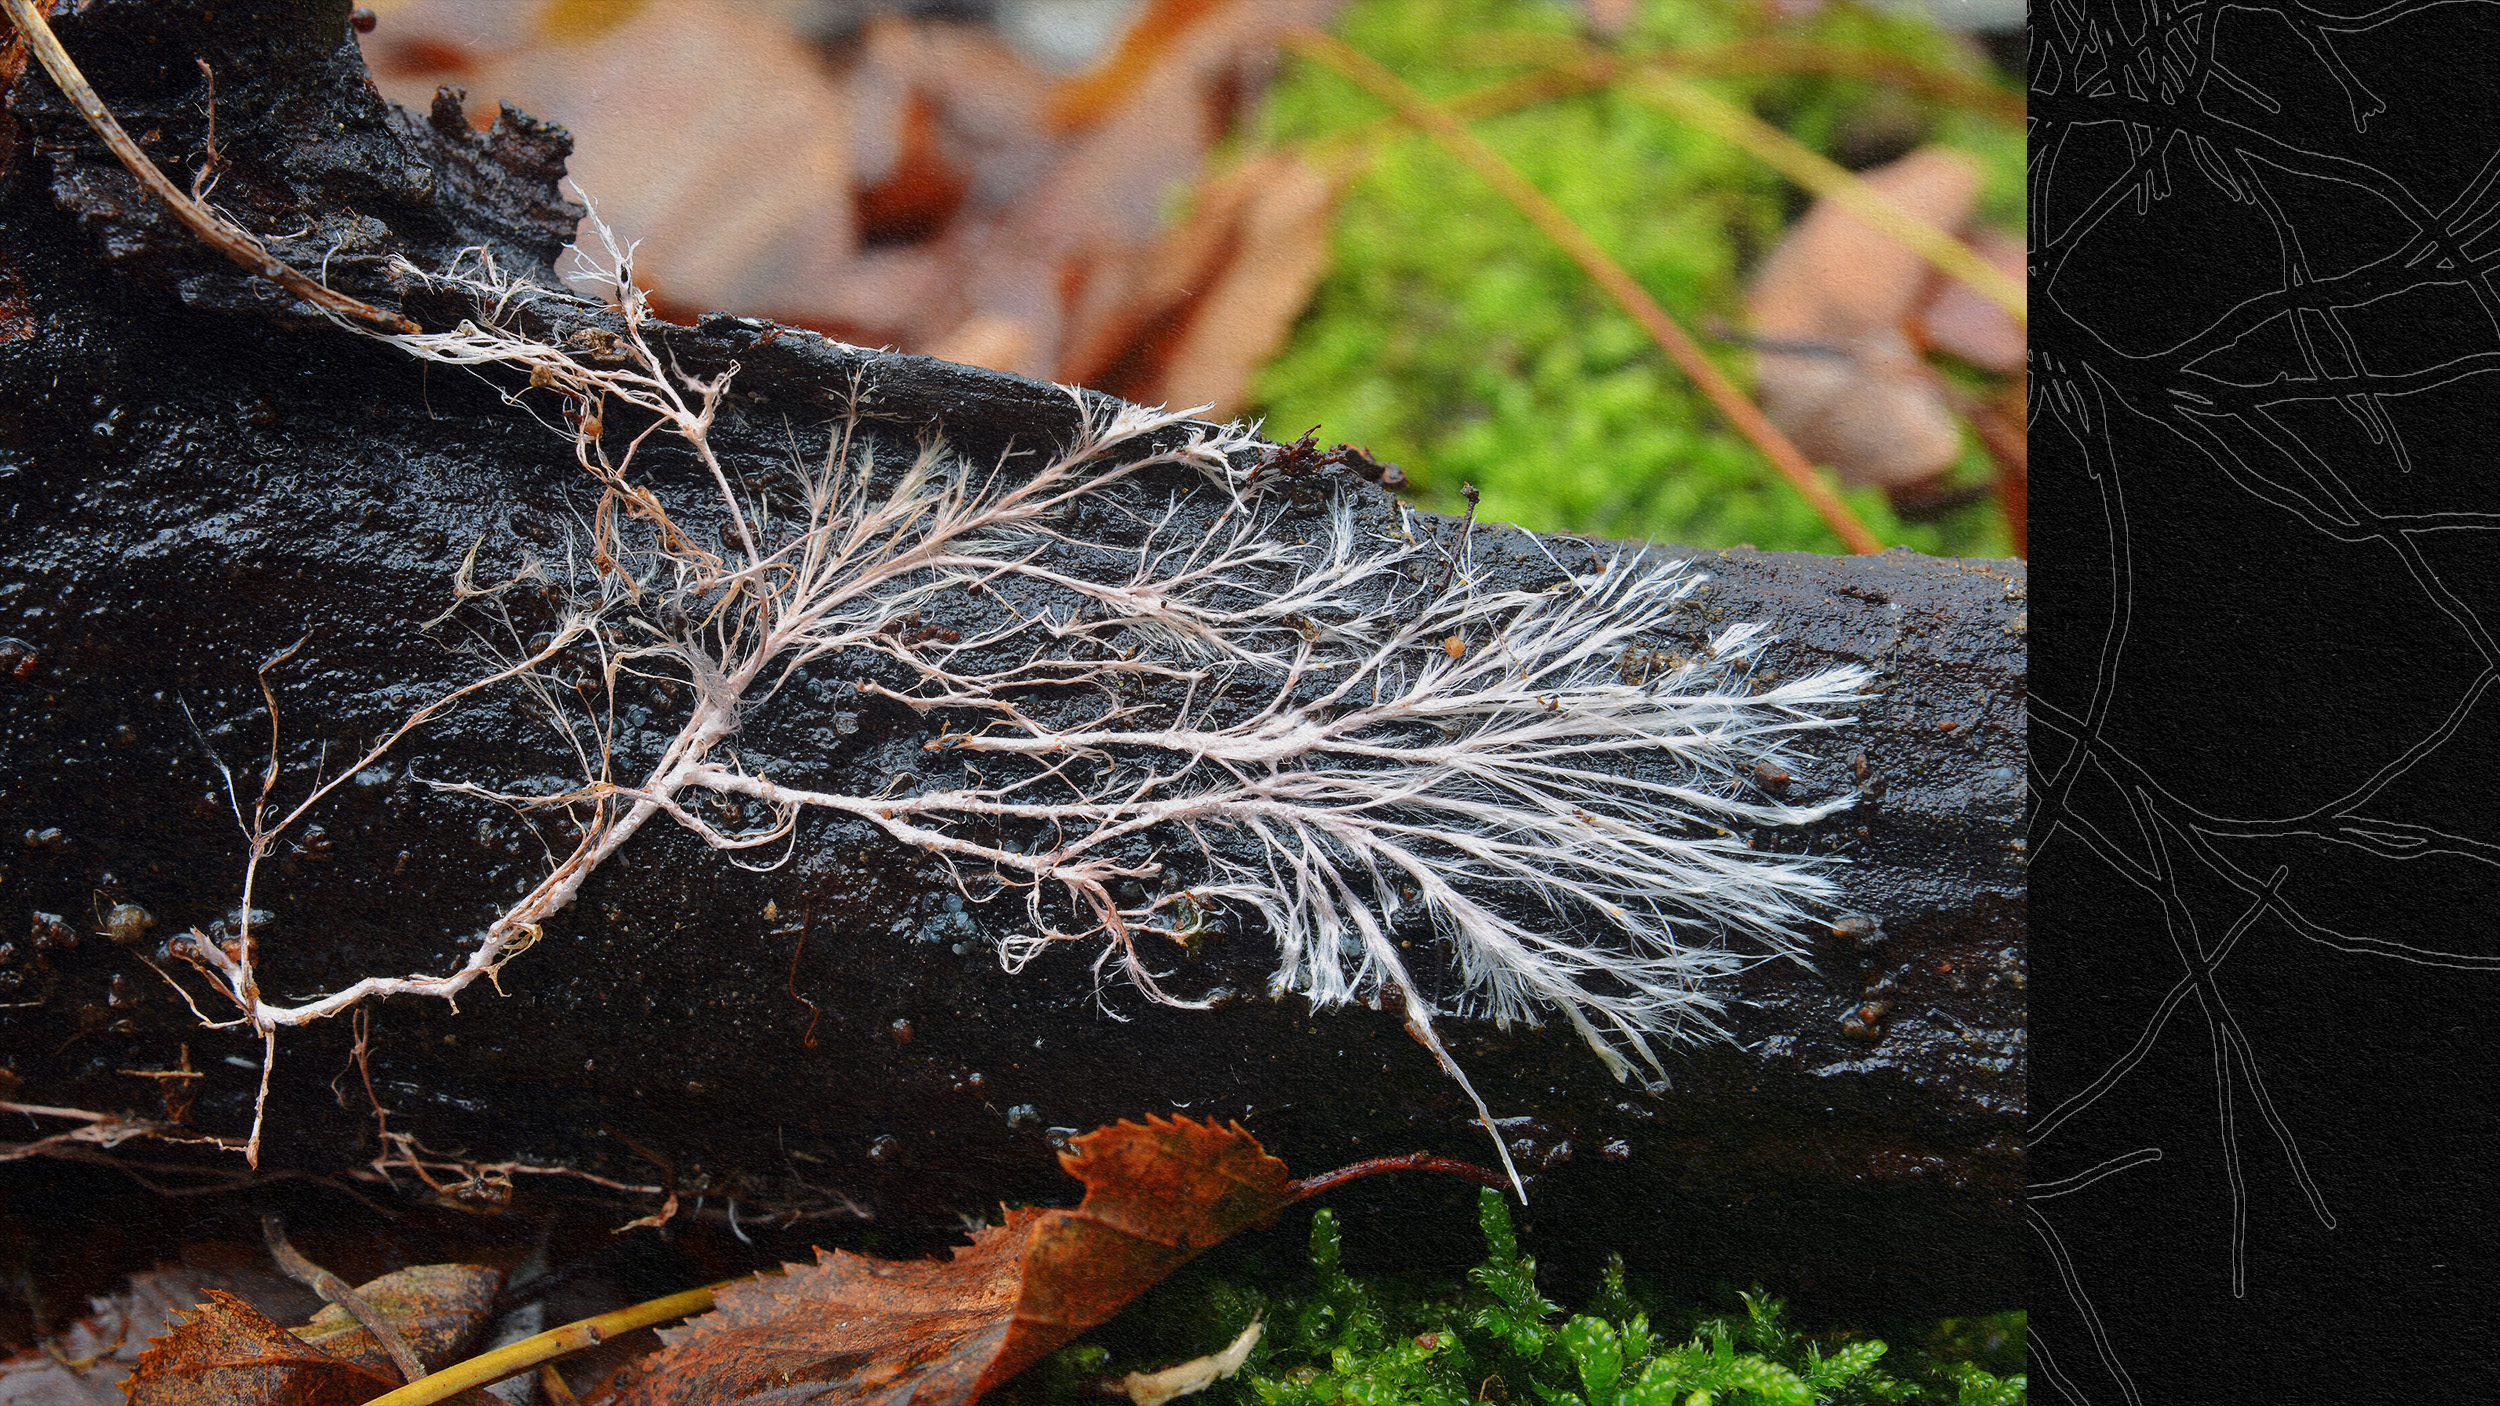 A black and white photo of a branch with moss on it, featuring mushrooms.